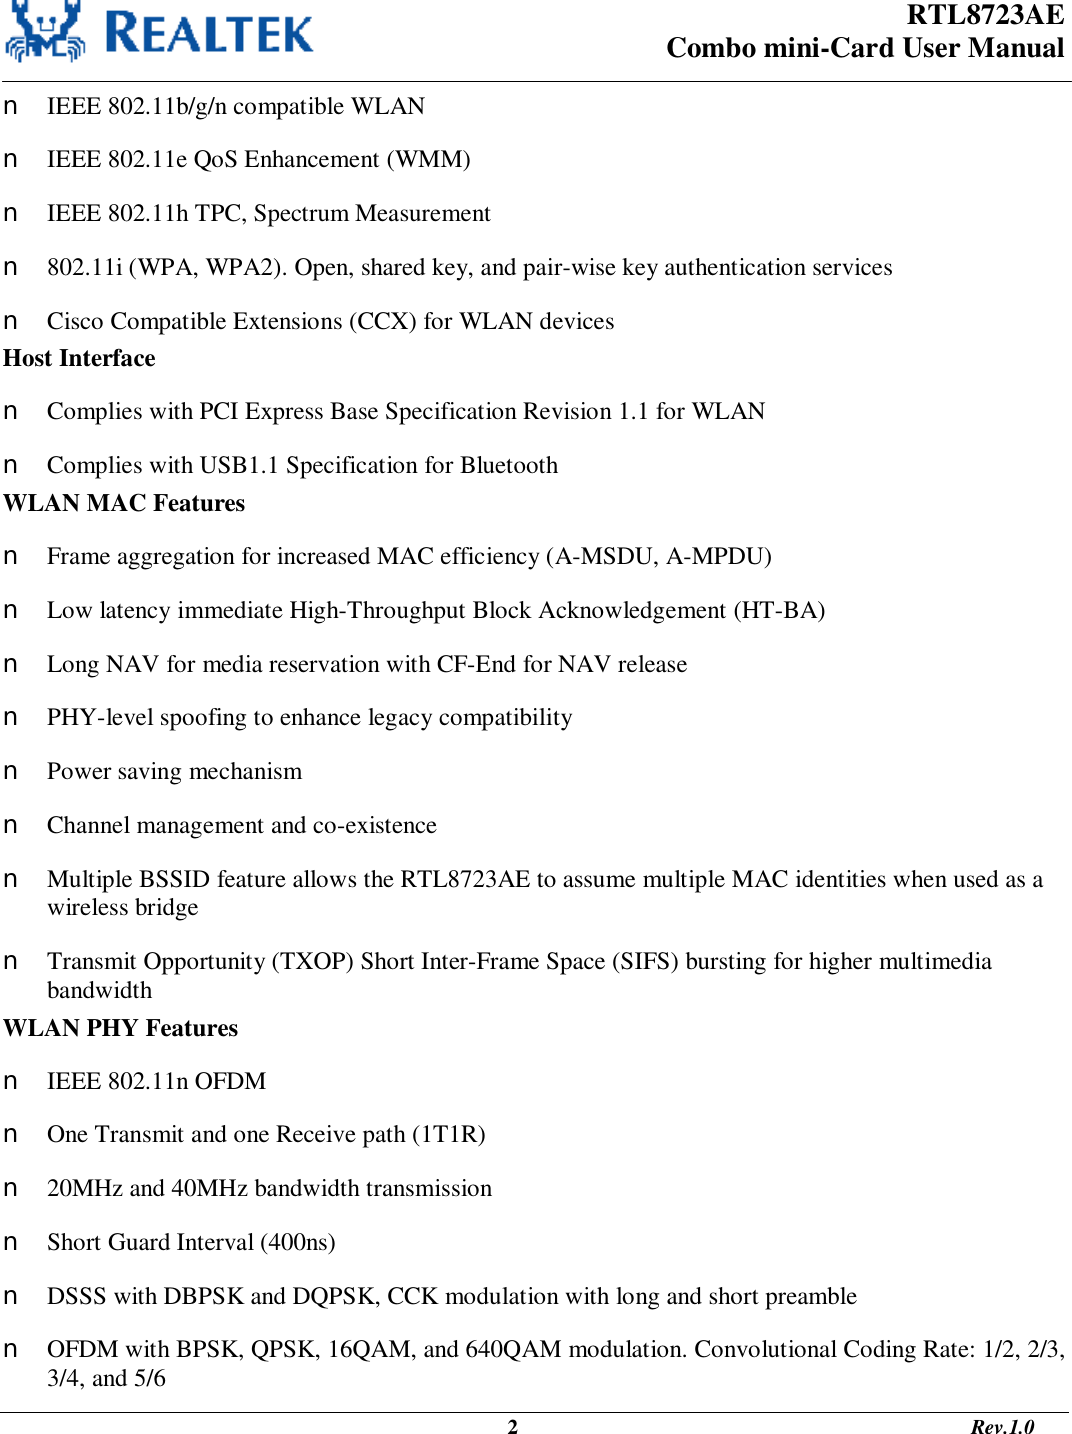 RTL8723AE Combo mini-Card User Manual                                                                                                  2                                                                                       Rev.1.0  n IEEE 802.11b/g/n compatible WLAN n IEEE 802.11e QoS Enhancement (WMM) n IEEE 802.11h TPC, Spectrum Measurement n 802.11i (WPA, WPA2). Open, shared key, and pair-wise key authentication services n Cisco Compatible Extensions (CCX) for WLAN devices Host Interface n Complies with PCI Express Base Specification Revision 1.1 for WLAN n Complies with USB1.1 Specification for Bluetooth WLAN MAC Features n Frame aggregation for increased MAC efficiency (A-MSDU, A-MPDU) n Low latency immediate High-Throughput Block Acknowledgement (HT-BA) n Long NAV for media reservation with CF-End for NAV release n PHY-level spoofing to enhance legacy compatibility n Power saving mechanism n Channel management and co-existence n Multiple BSSID feature allows the RTL8723AE to assume multiple MAC identities when used as a wireless bridge n Transmit Opportunity (TXOP) Short Inter-Frame Space (SIFS) bursting for higher multimedia bandwidth WLAN PHY Features n IEEE 802.11n OFDM n One Transmit and one Receive path (1T1R) n 20MHz and 40MHz bandwidth transmission n Short Guard Interval (400ns) n DSSS with DBPSK and DQPSK, CCK modulation with long and short preamble n OFDM with BPSK, QPSK, 16QAM, and 640QAM modulation. Convolutional Coding Rate: 1/2, 2/3, 3/4, and 5/6 